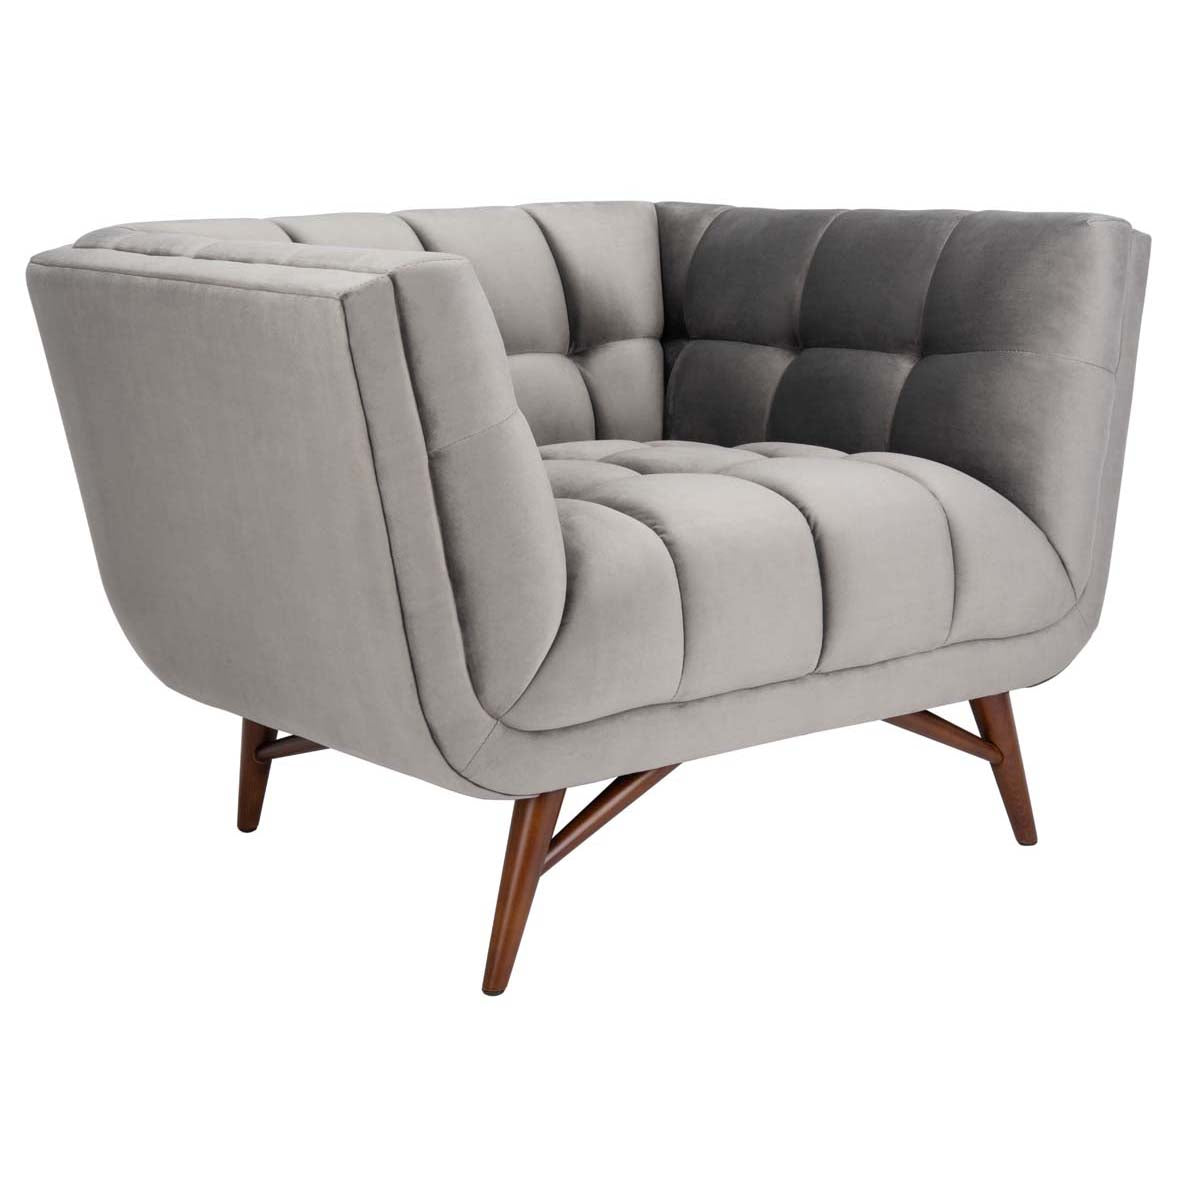 Safavieh Couture Onyx Mid Century Tufted Club Chair